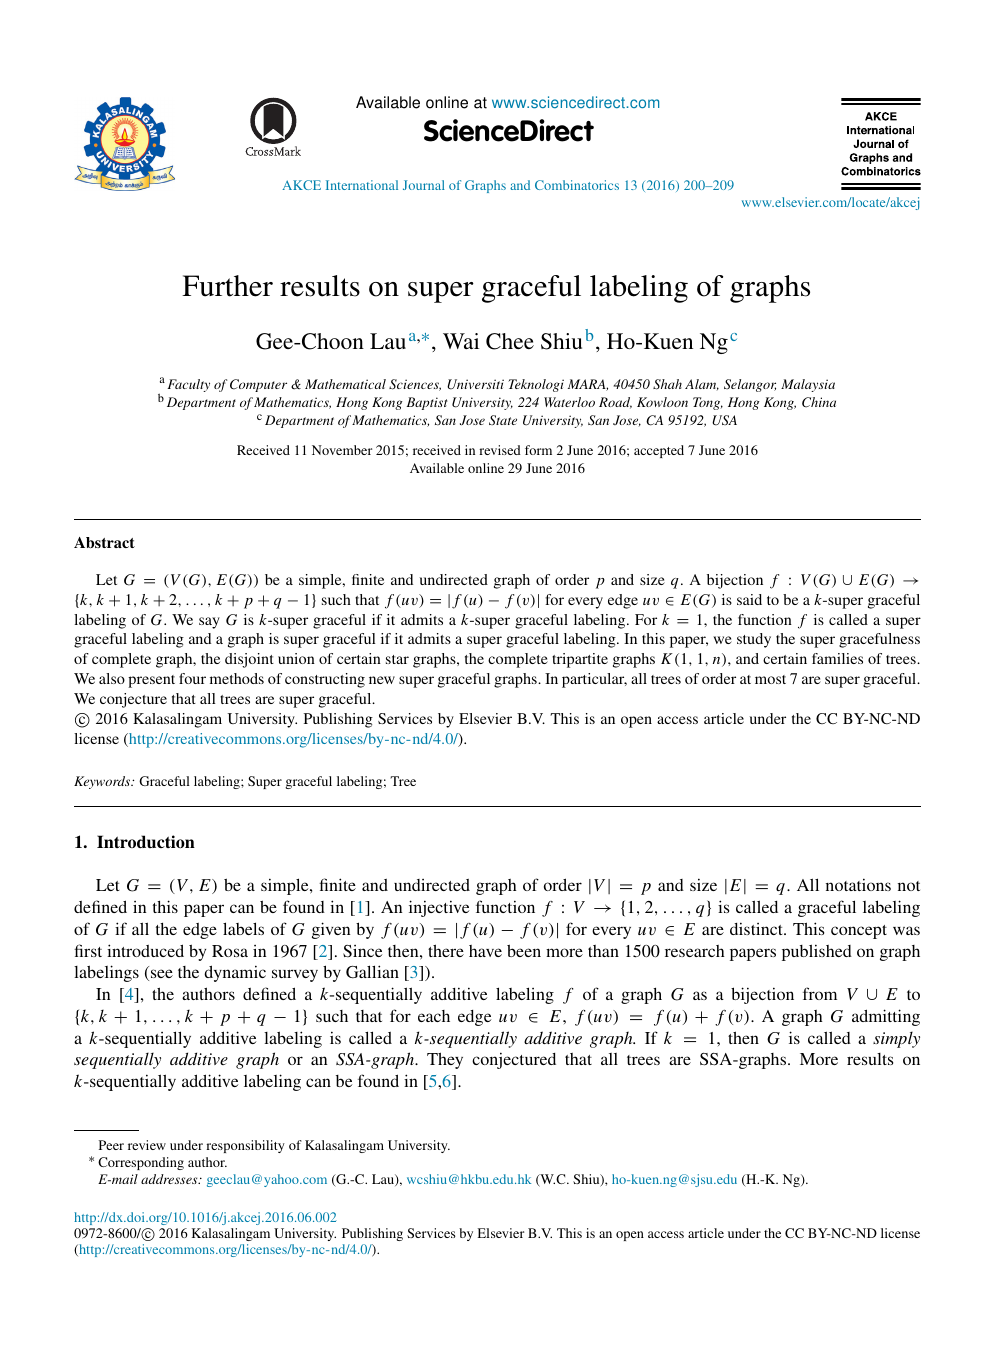 Further Results On Super Graceful Labeling Of Graphs Topic Of Research Paper In Computer And Information Sciences Download Scholarly Article Pdf And Read For Free On Cyberleninka Open Science Hub